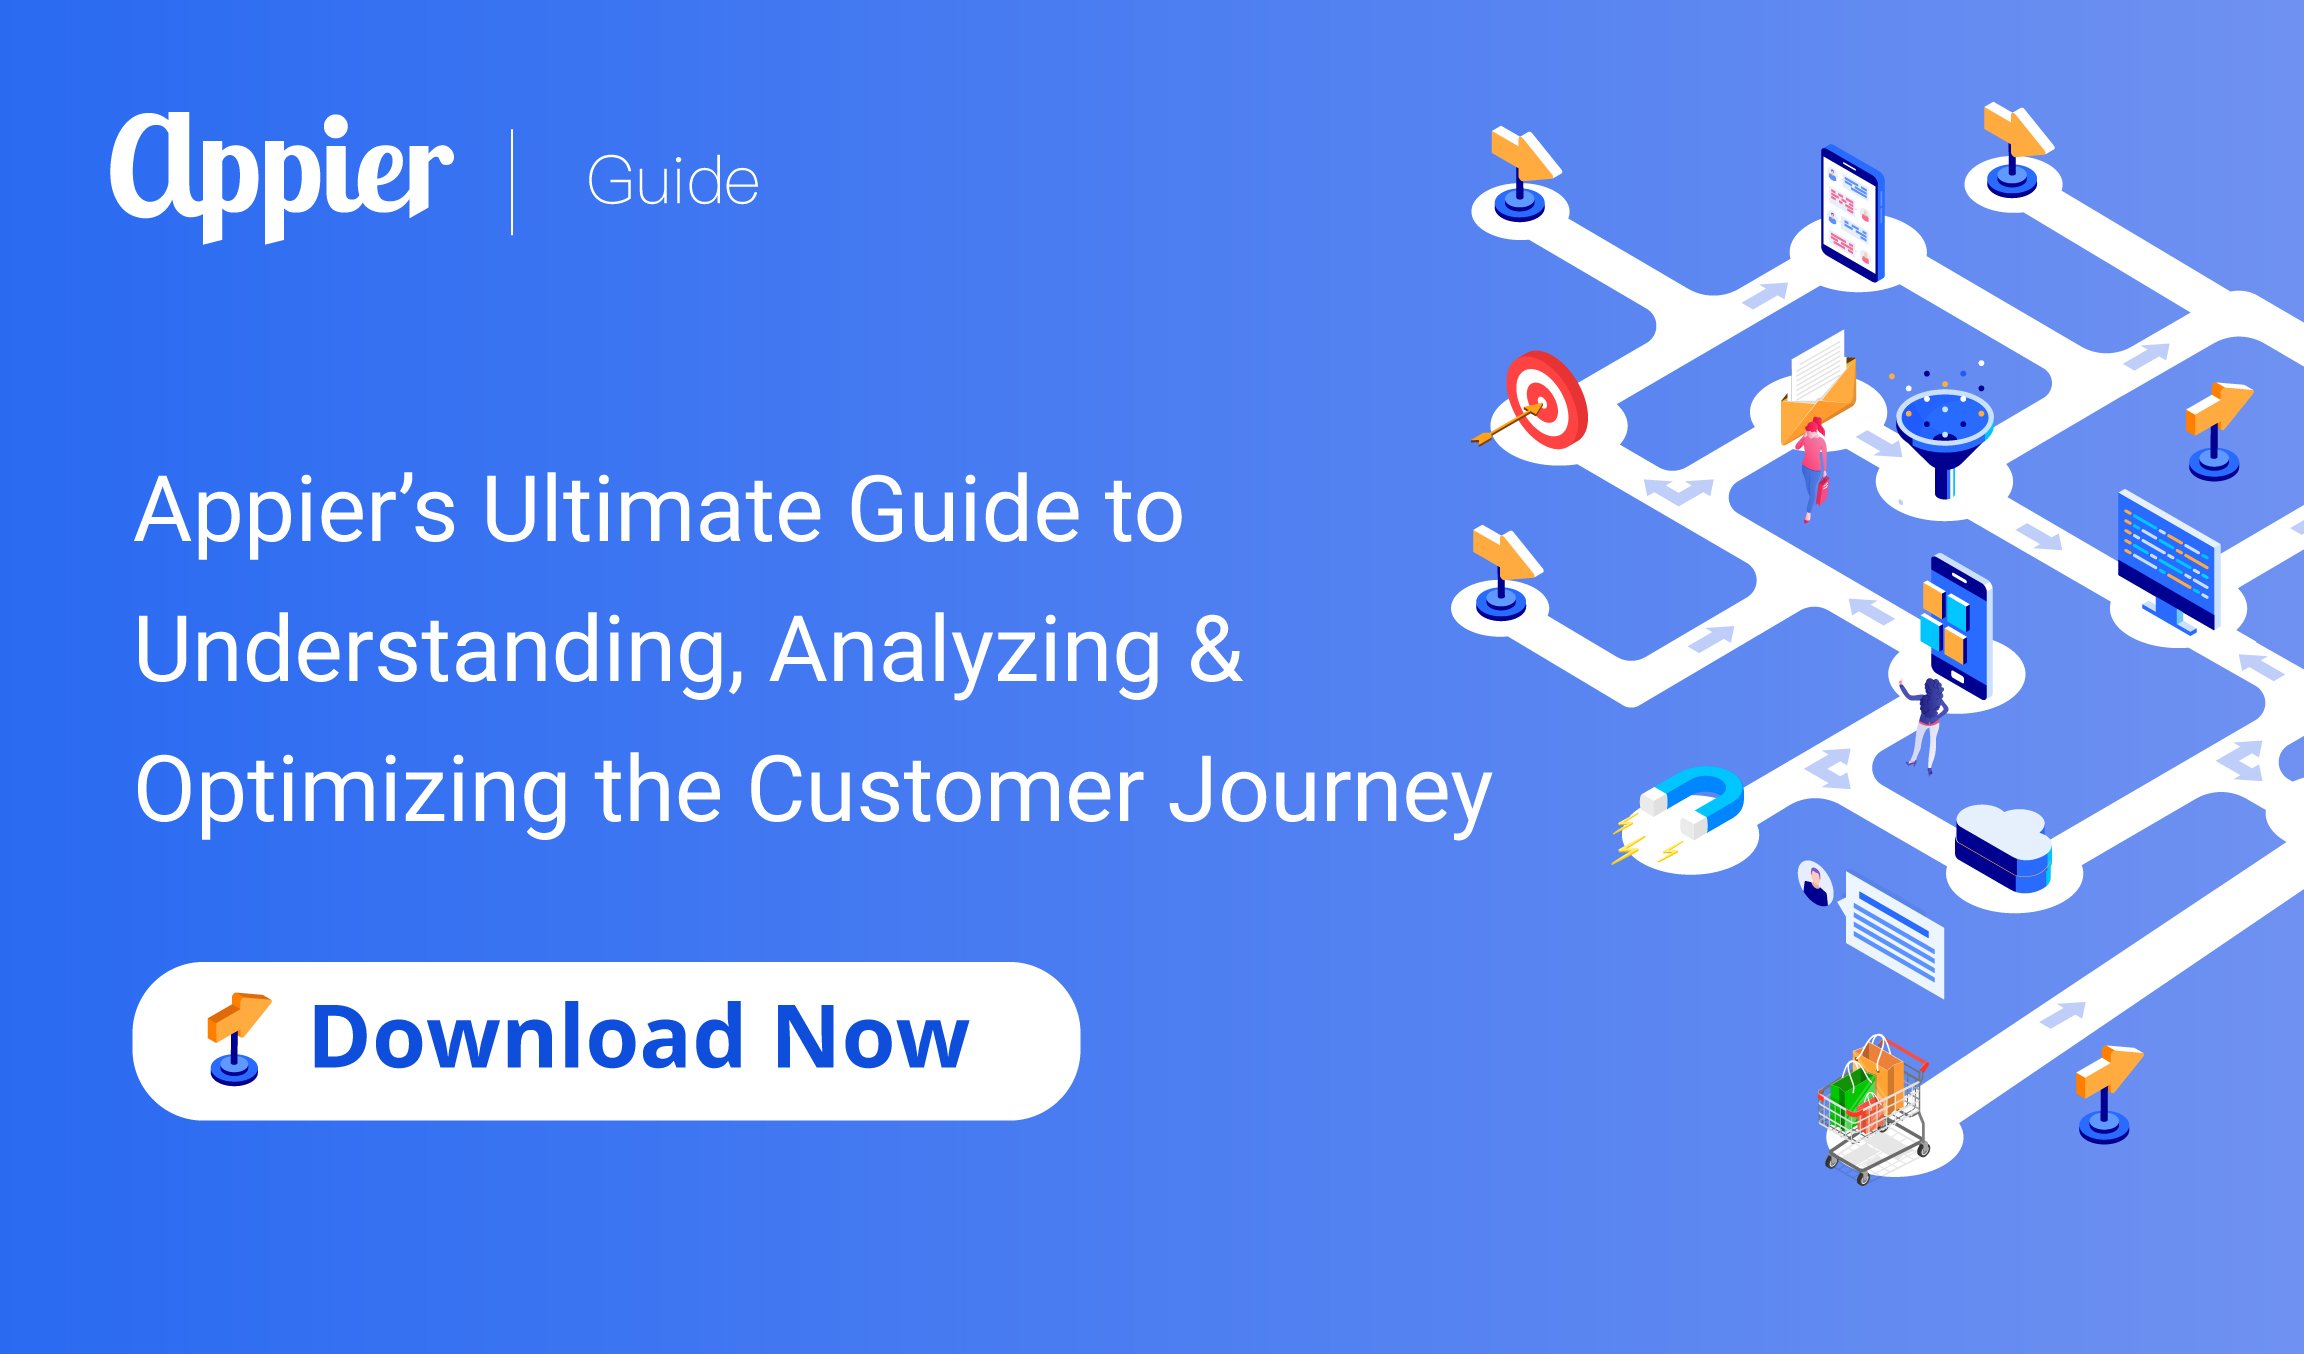 Your Guide to the Customer Journey